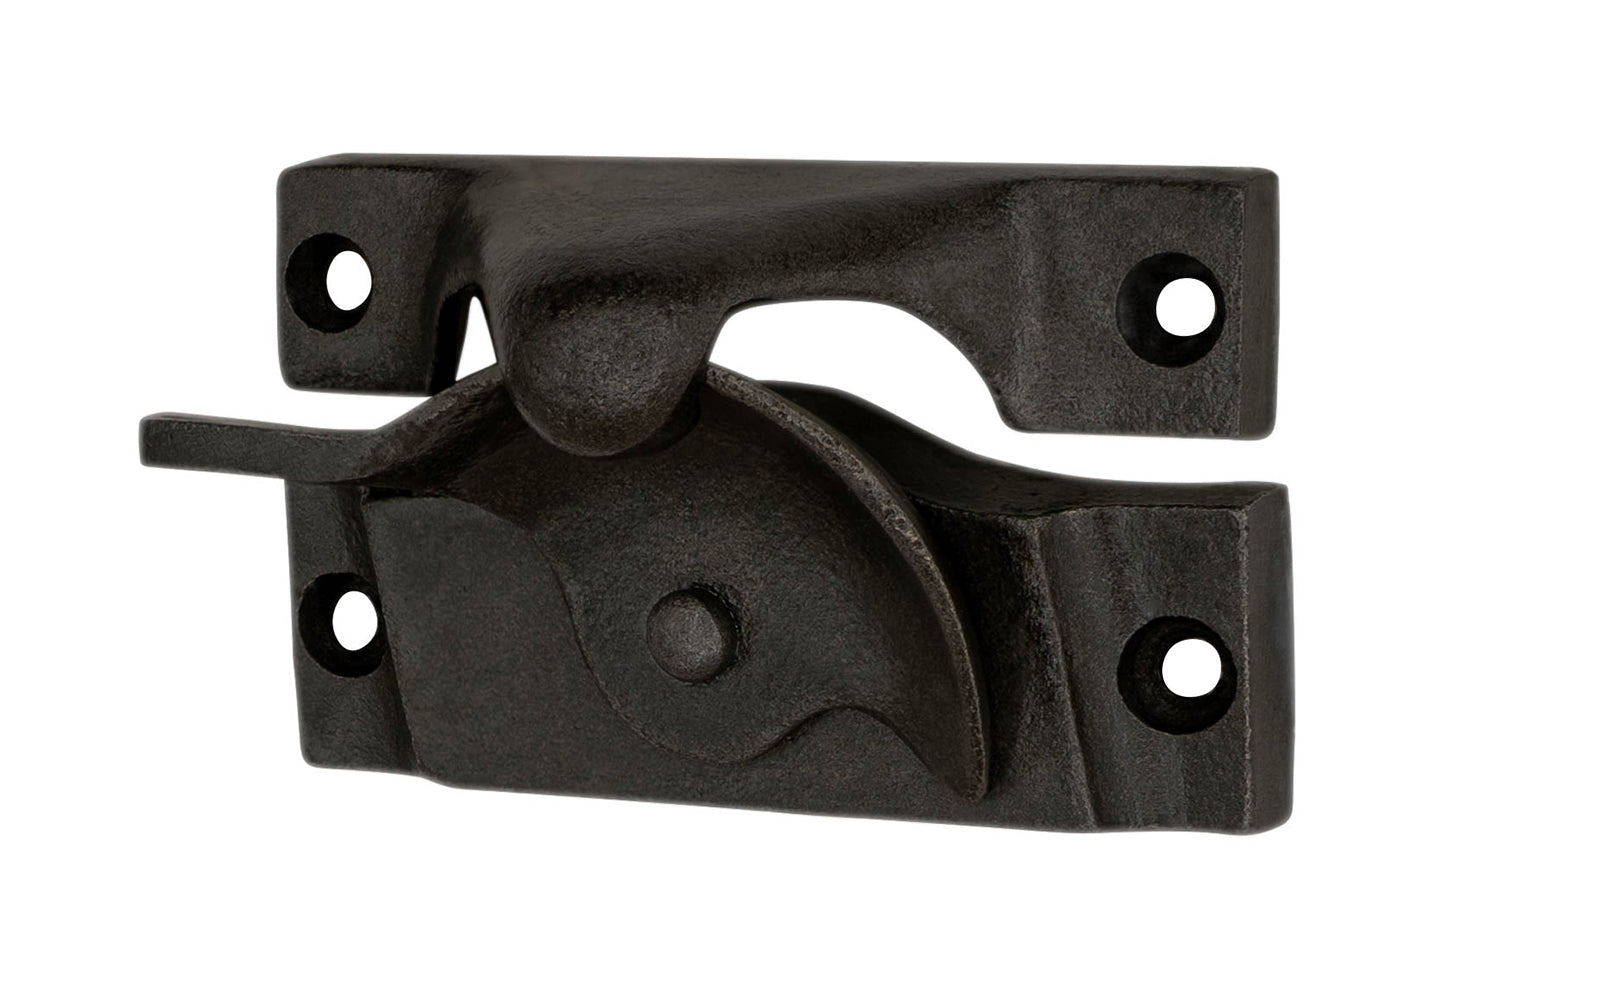 A rustic-looking Traditional Cast Iron crescent-style sash lock designed for sash or hung windows. This well-made lock is formed of cast iron material with a durable pivot turn. The turn operates smoothly & will lock & tighten your windows securely in place. Vintage cast iron finish. Model 88455